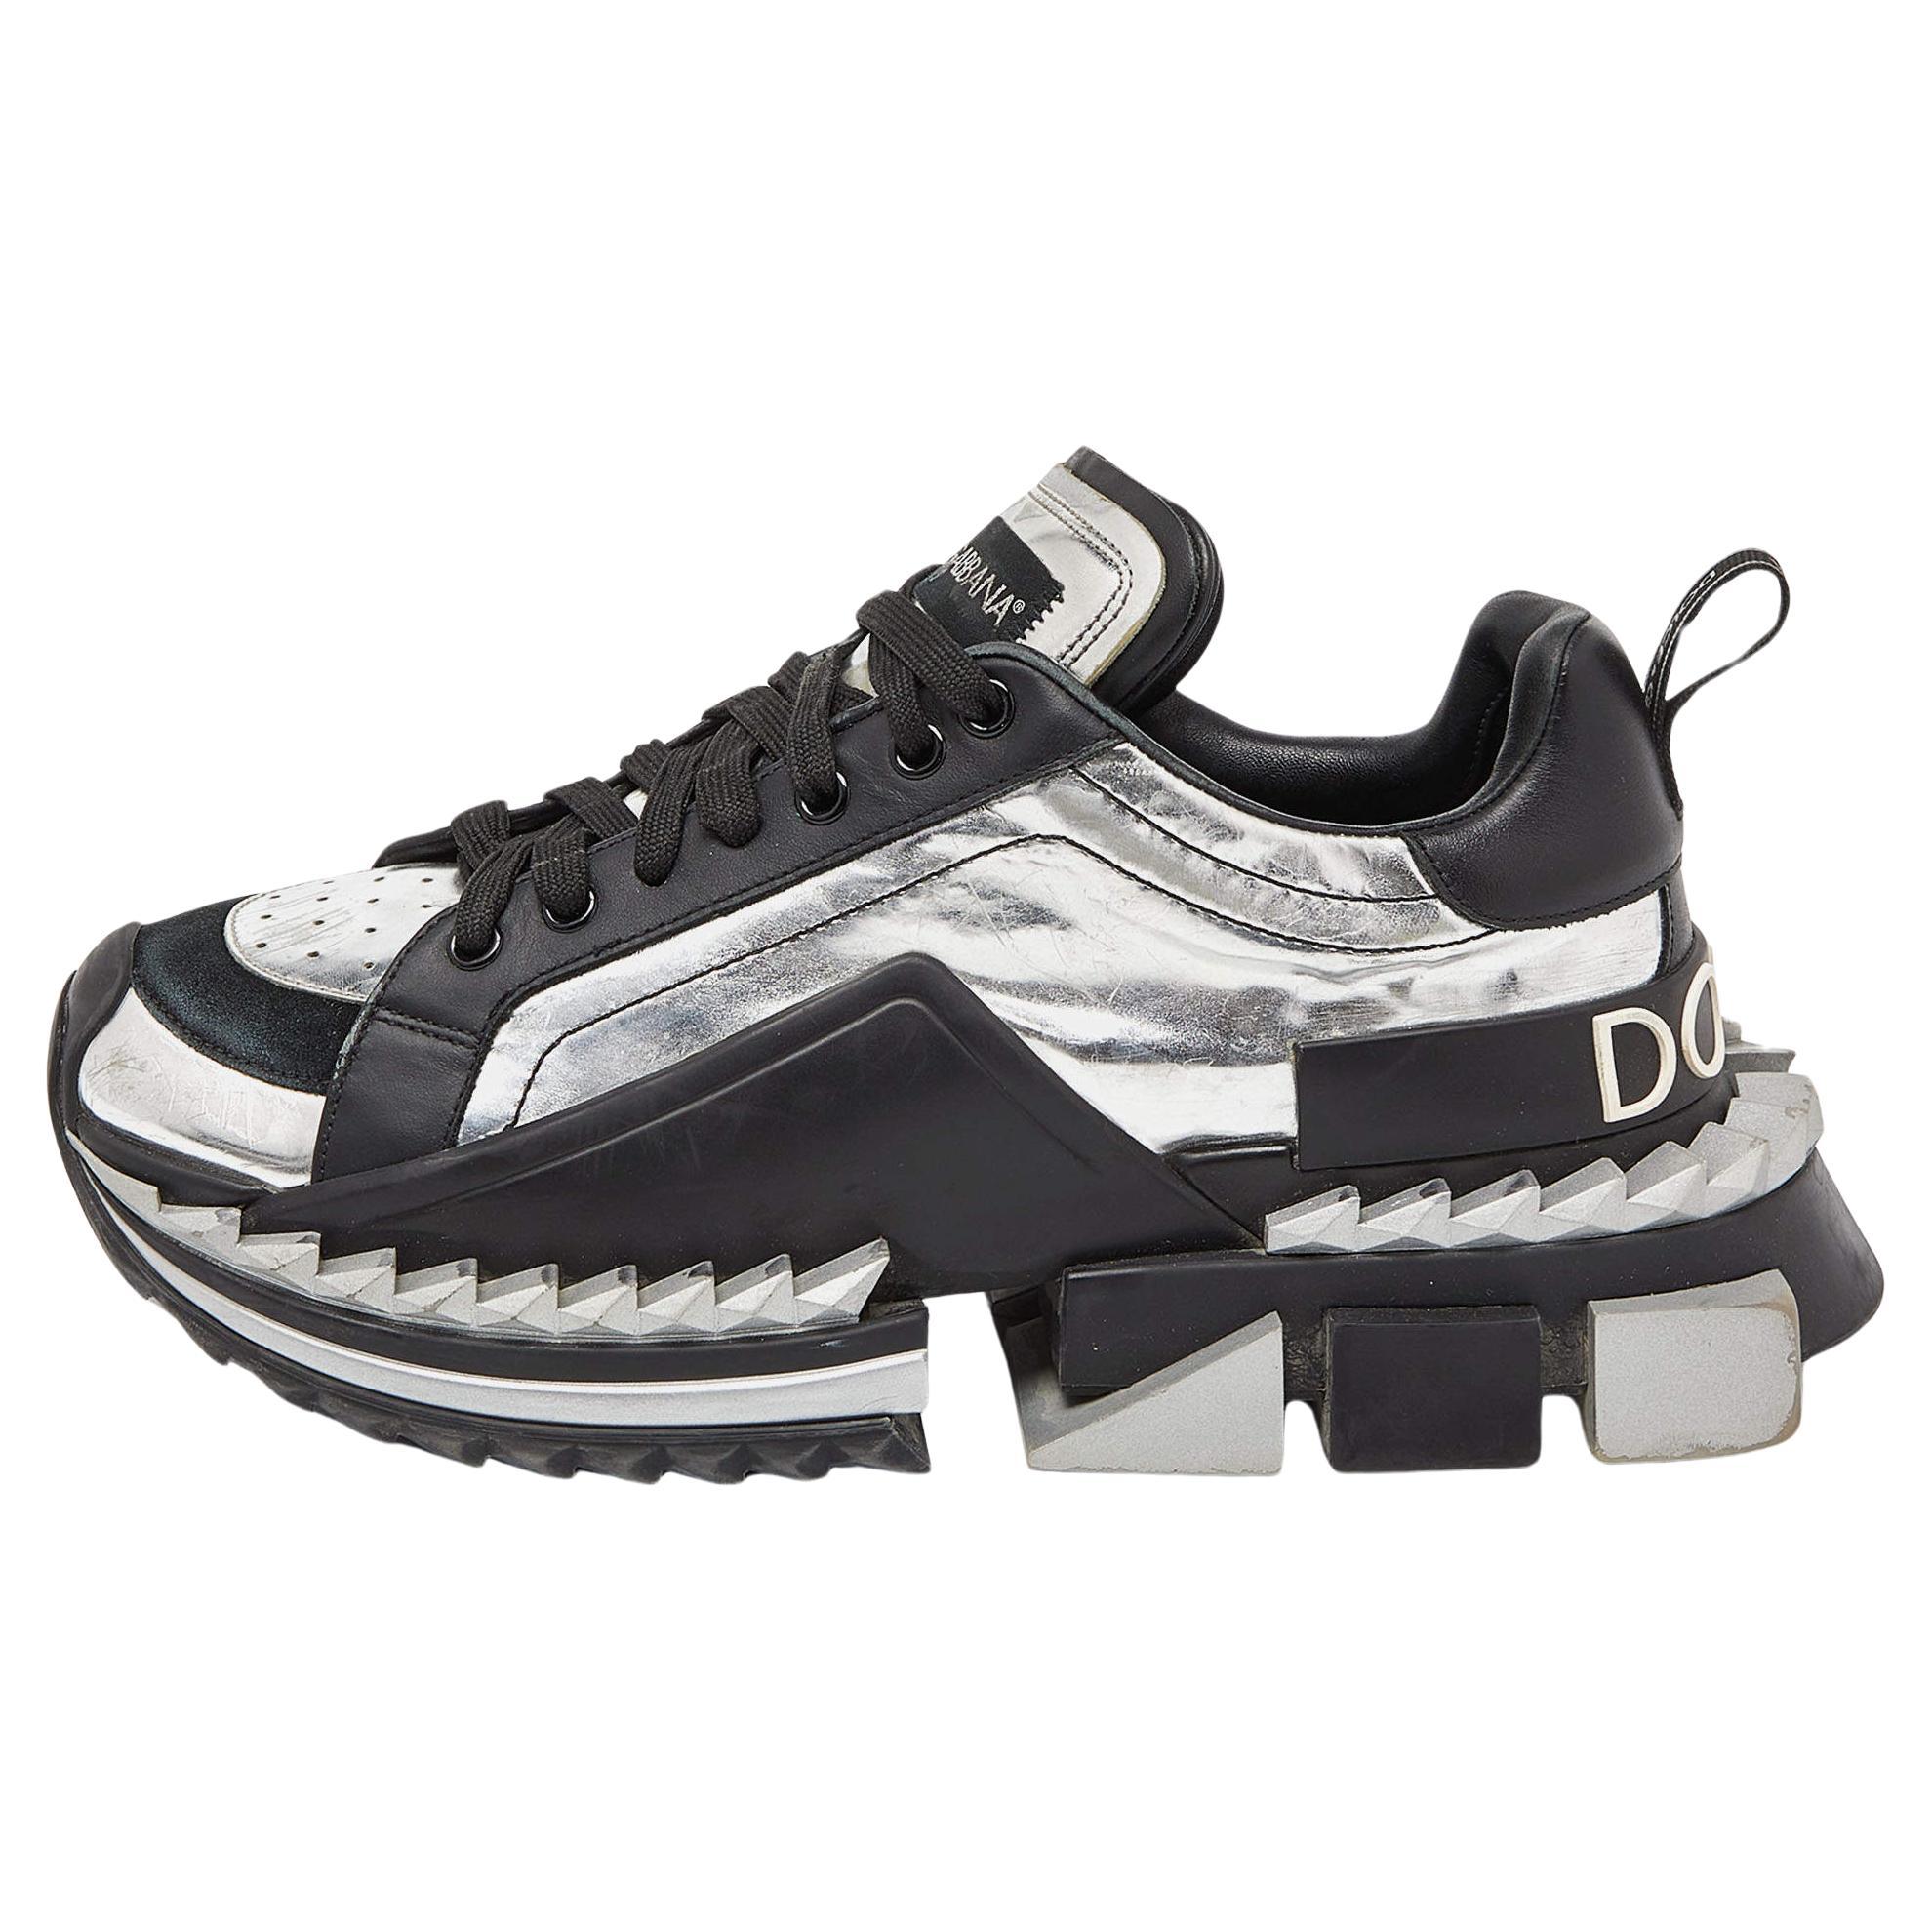 Dolce & Gabbana Black/Silver Leather and Patent Super King Platform Sneakers Siz For Sale